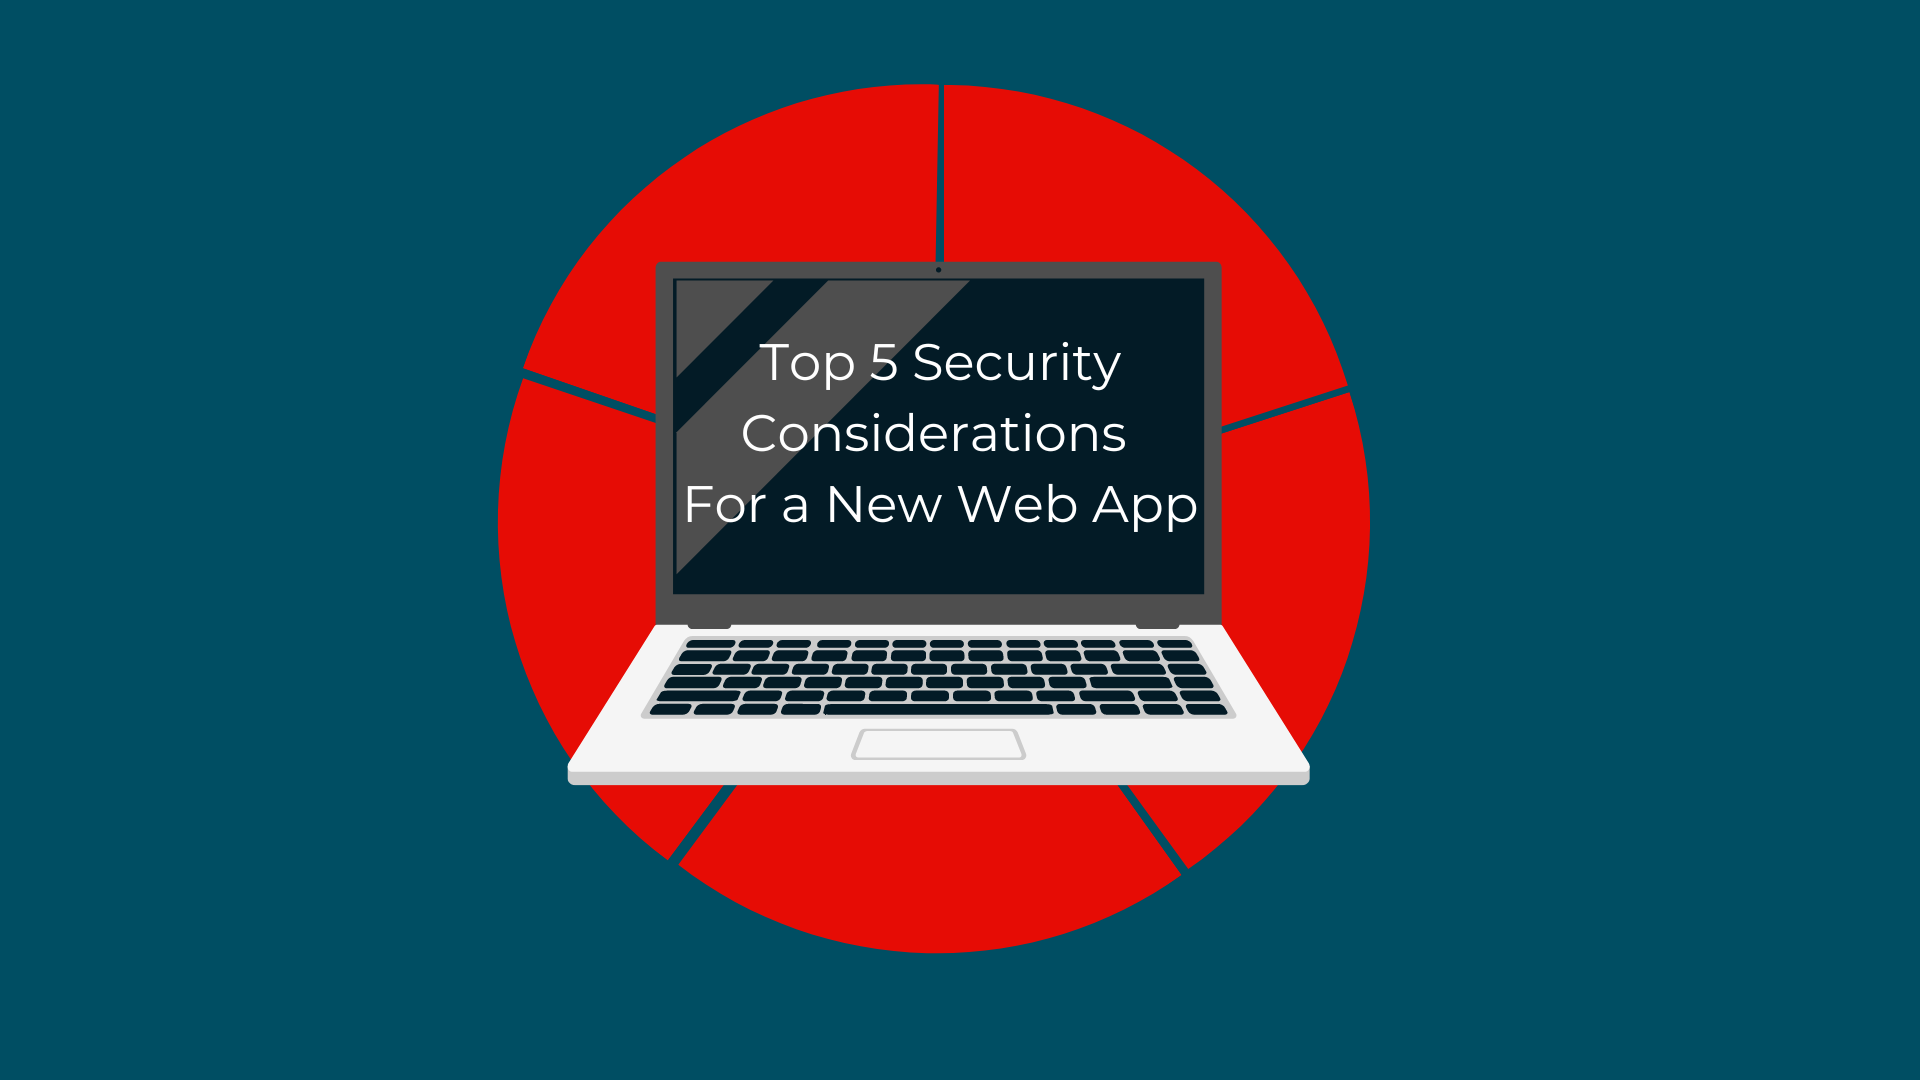 Top 5 Security Considerations for a New Web App